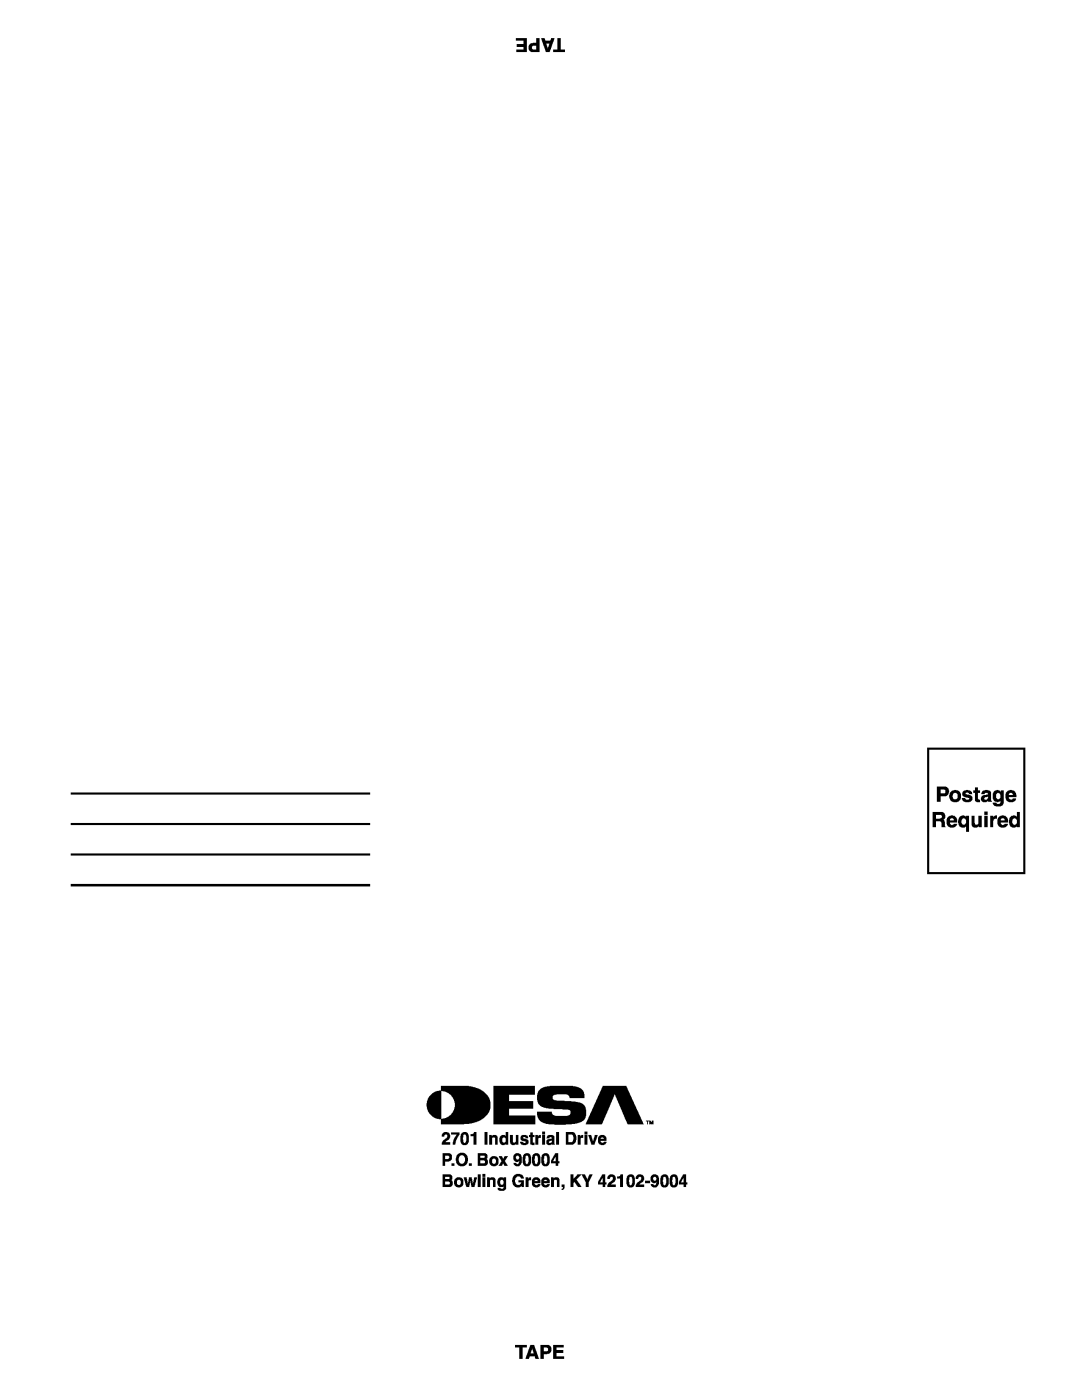 Desa (V) CB36(N installation manual Postage Required, Industrial Drive P.O. Box Bowling Green, KY 